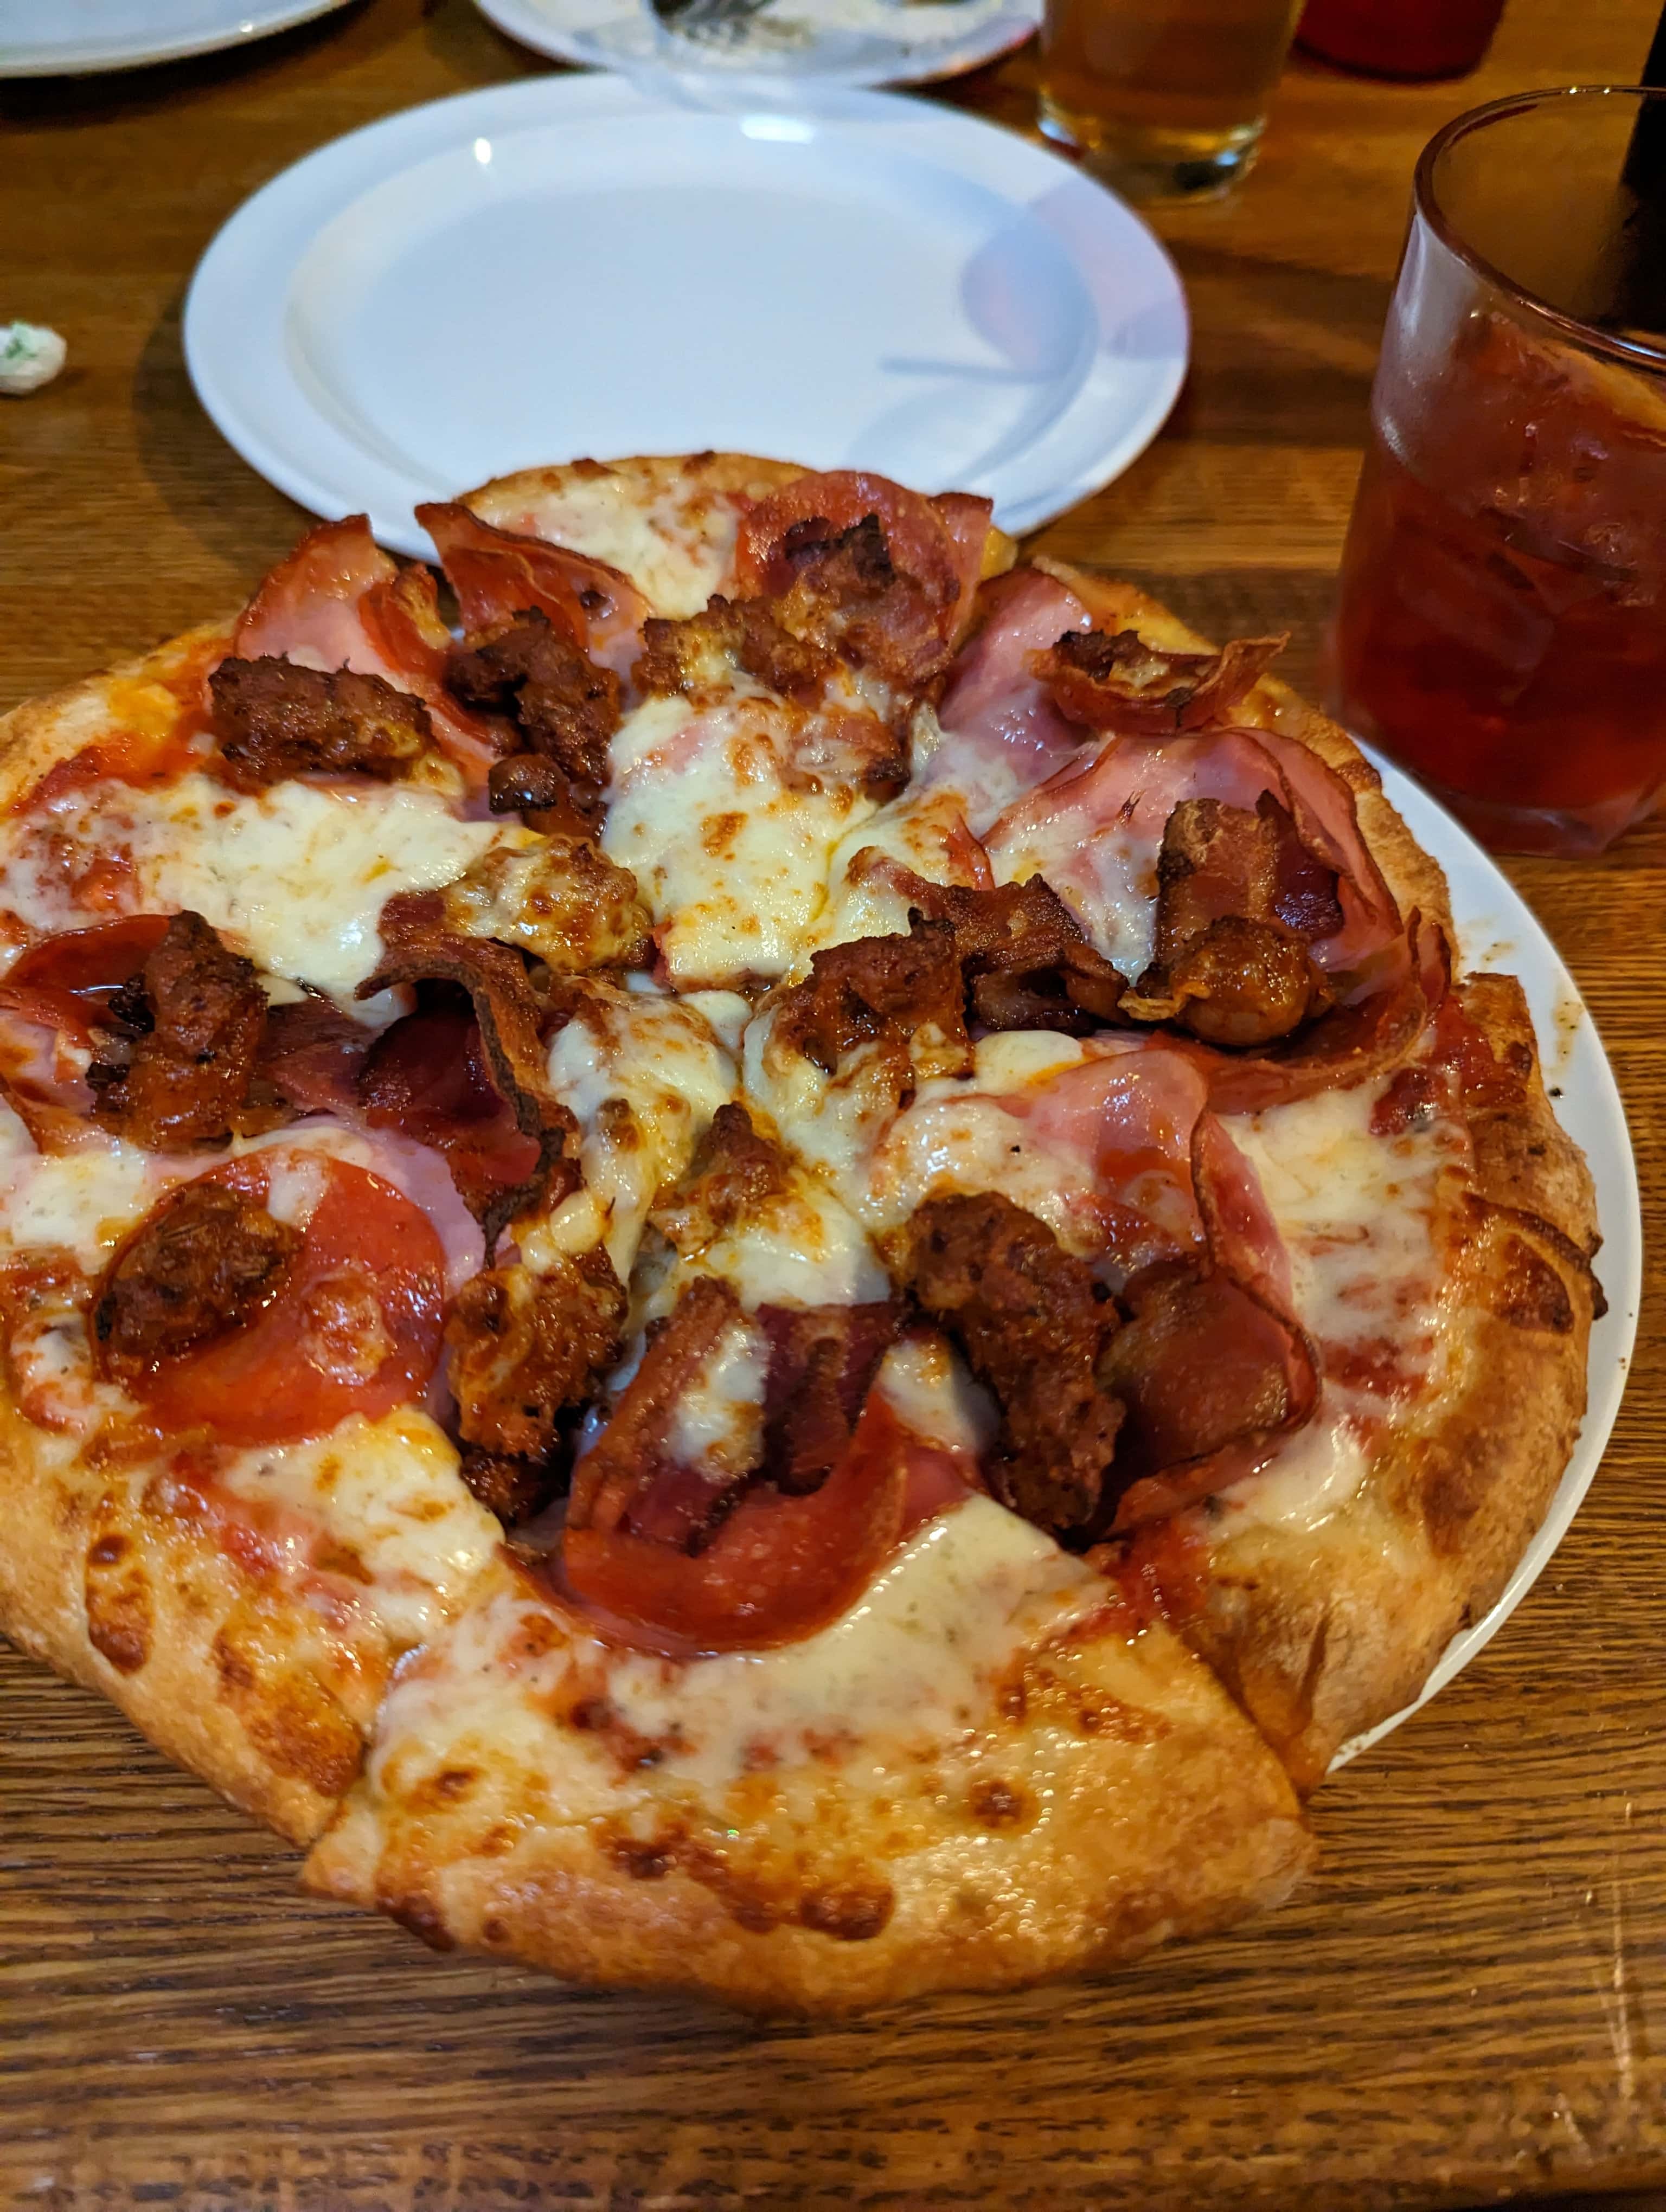 Giovanni’s Pizzeria - Mammoth Lakes (CA 93546), US, pizza time